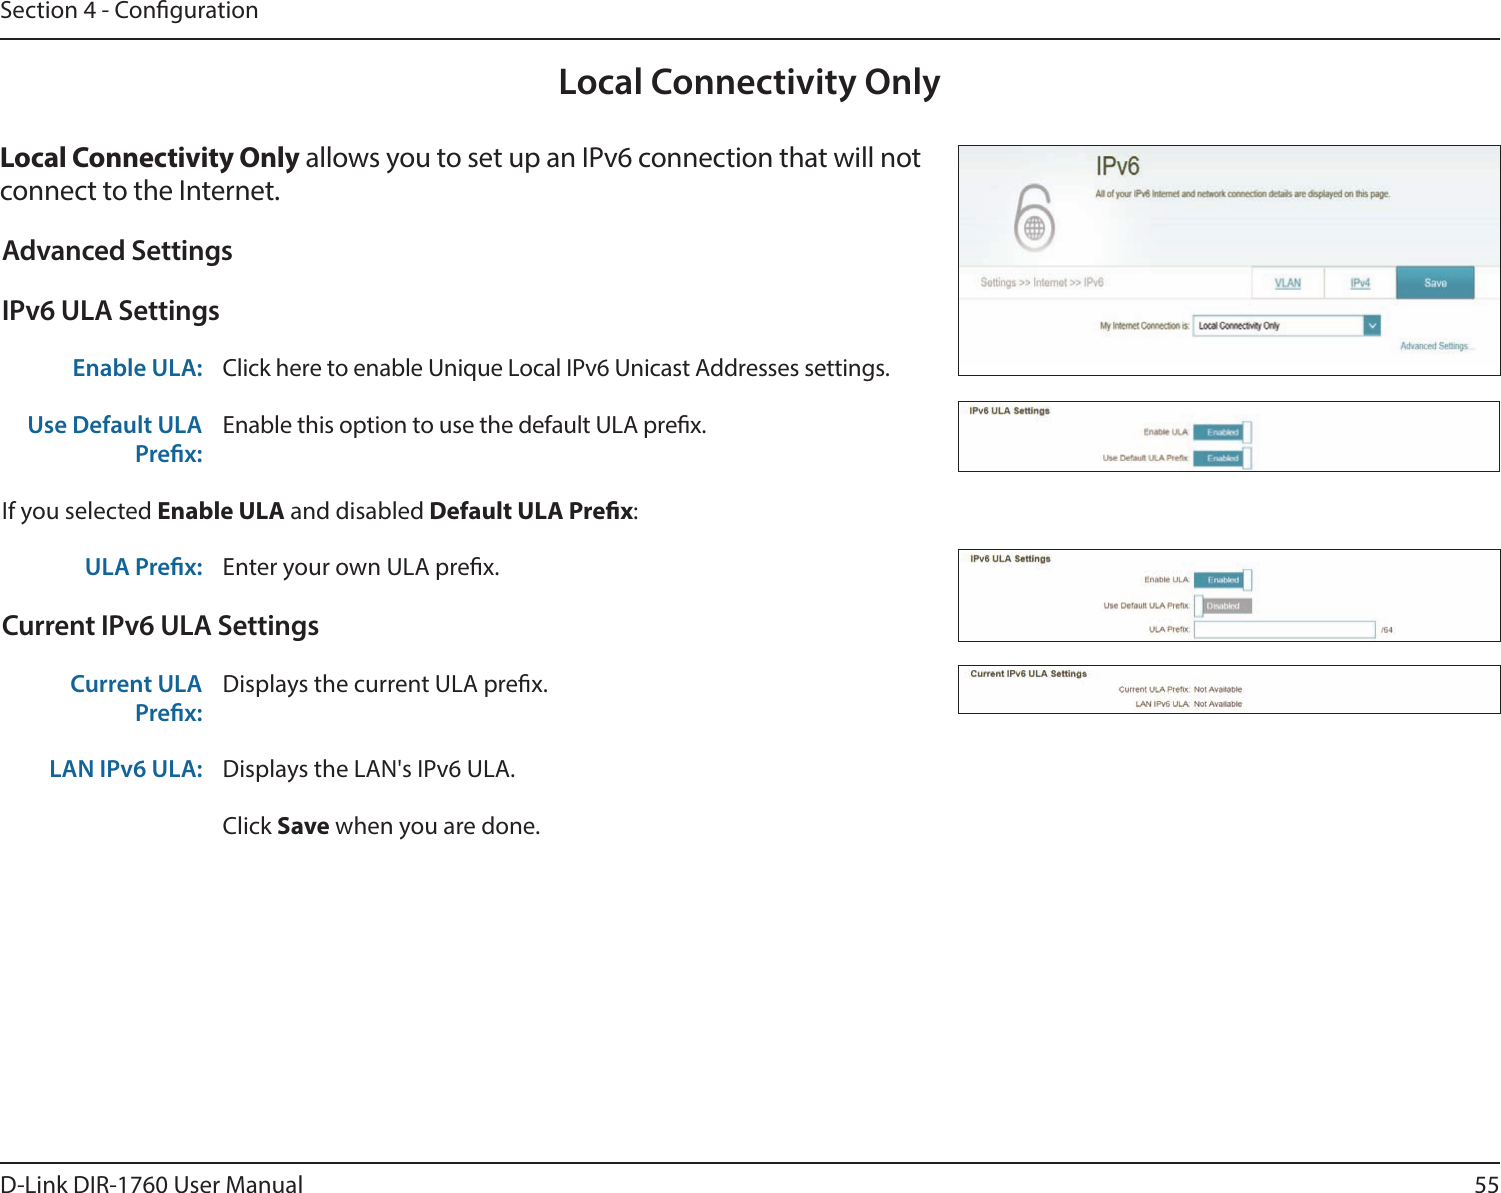 55D-Link DIR-1760 User ManualSection 4 - CongurationLocal Connectivity OnlyLocal Connectivity Only allows you to set up an IPv6 connection that will not connect to the Internet.Advanced SettingsIPv6 ULA SettingsEnable ULA: Click here to enable Unique Local IPv6 Unicast Addresses settings.Use Default ULA Prex:Enable this option to use the default ULA prex.If you selected Enable ULA and disabled Default ULA Prex:ULA Prex: Enter your own ULA prex.Current IPv6 ULA SettingsCurrent ULA Prex:Displays the current ULA prex. LAN IPv6 ULA: Displays the LAN&apos;s IPv6 ULA.Click Save when you are done.